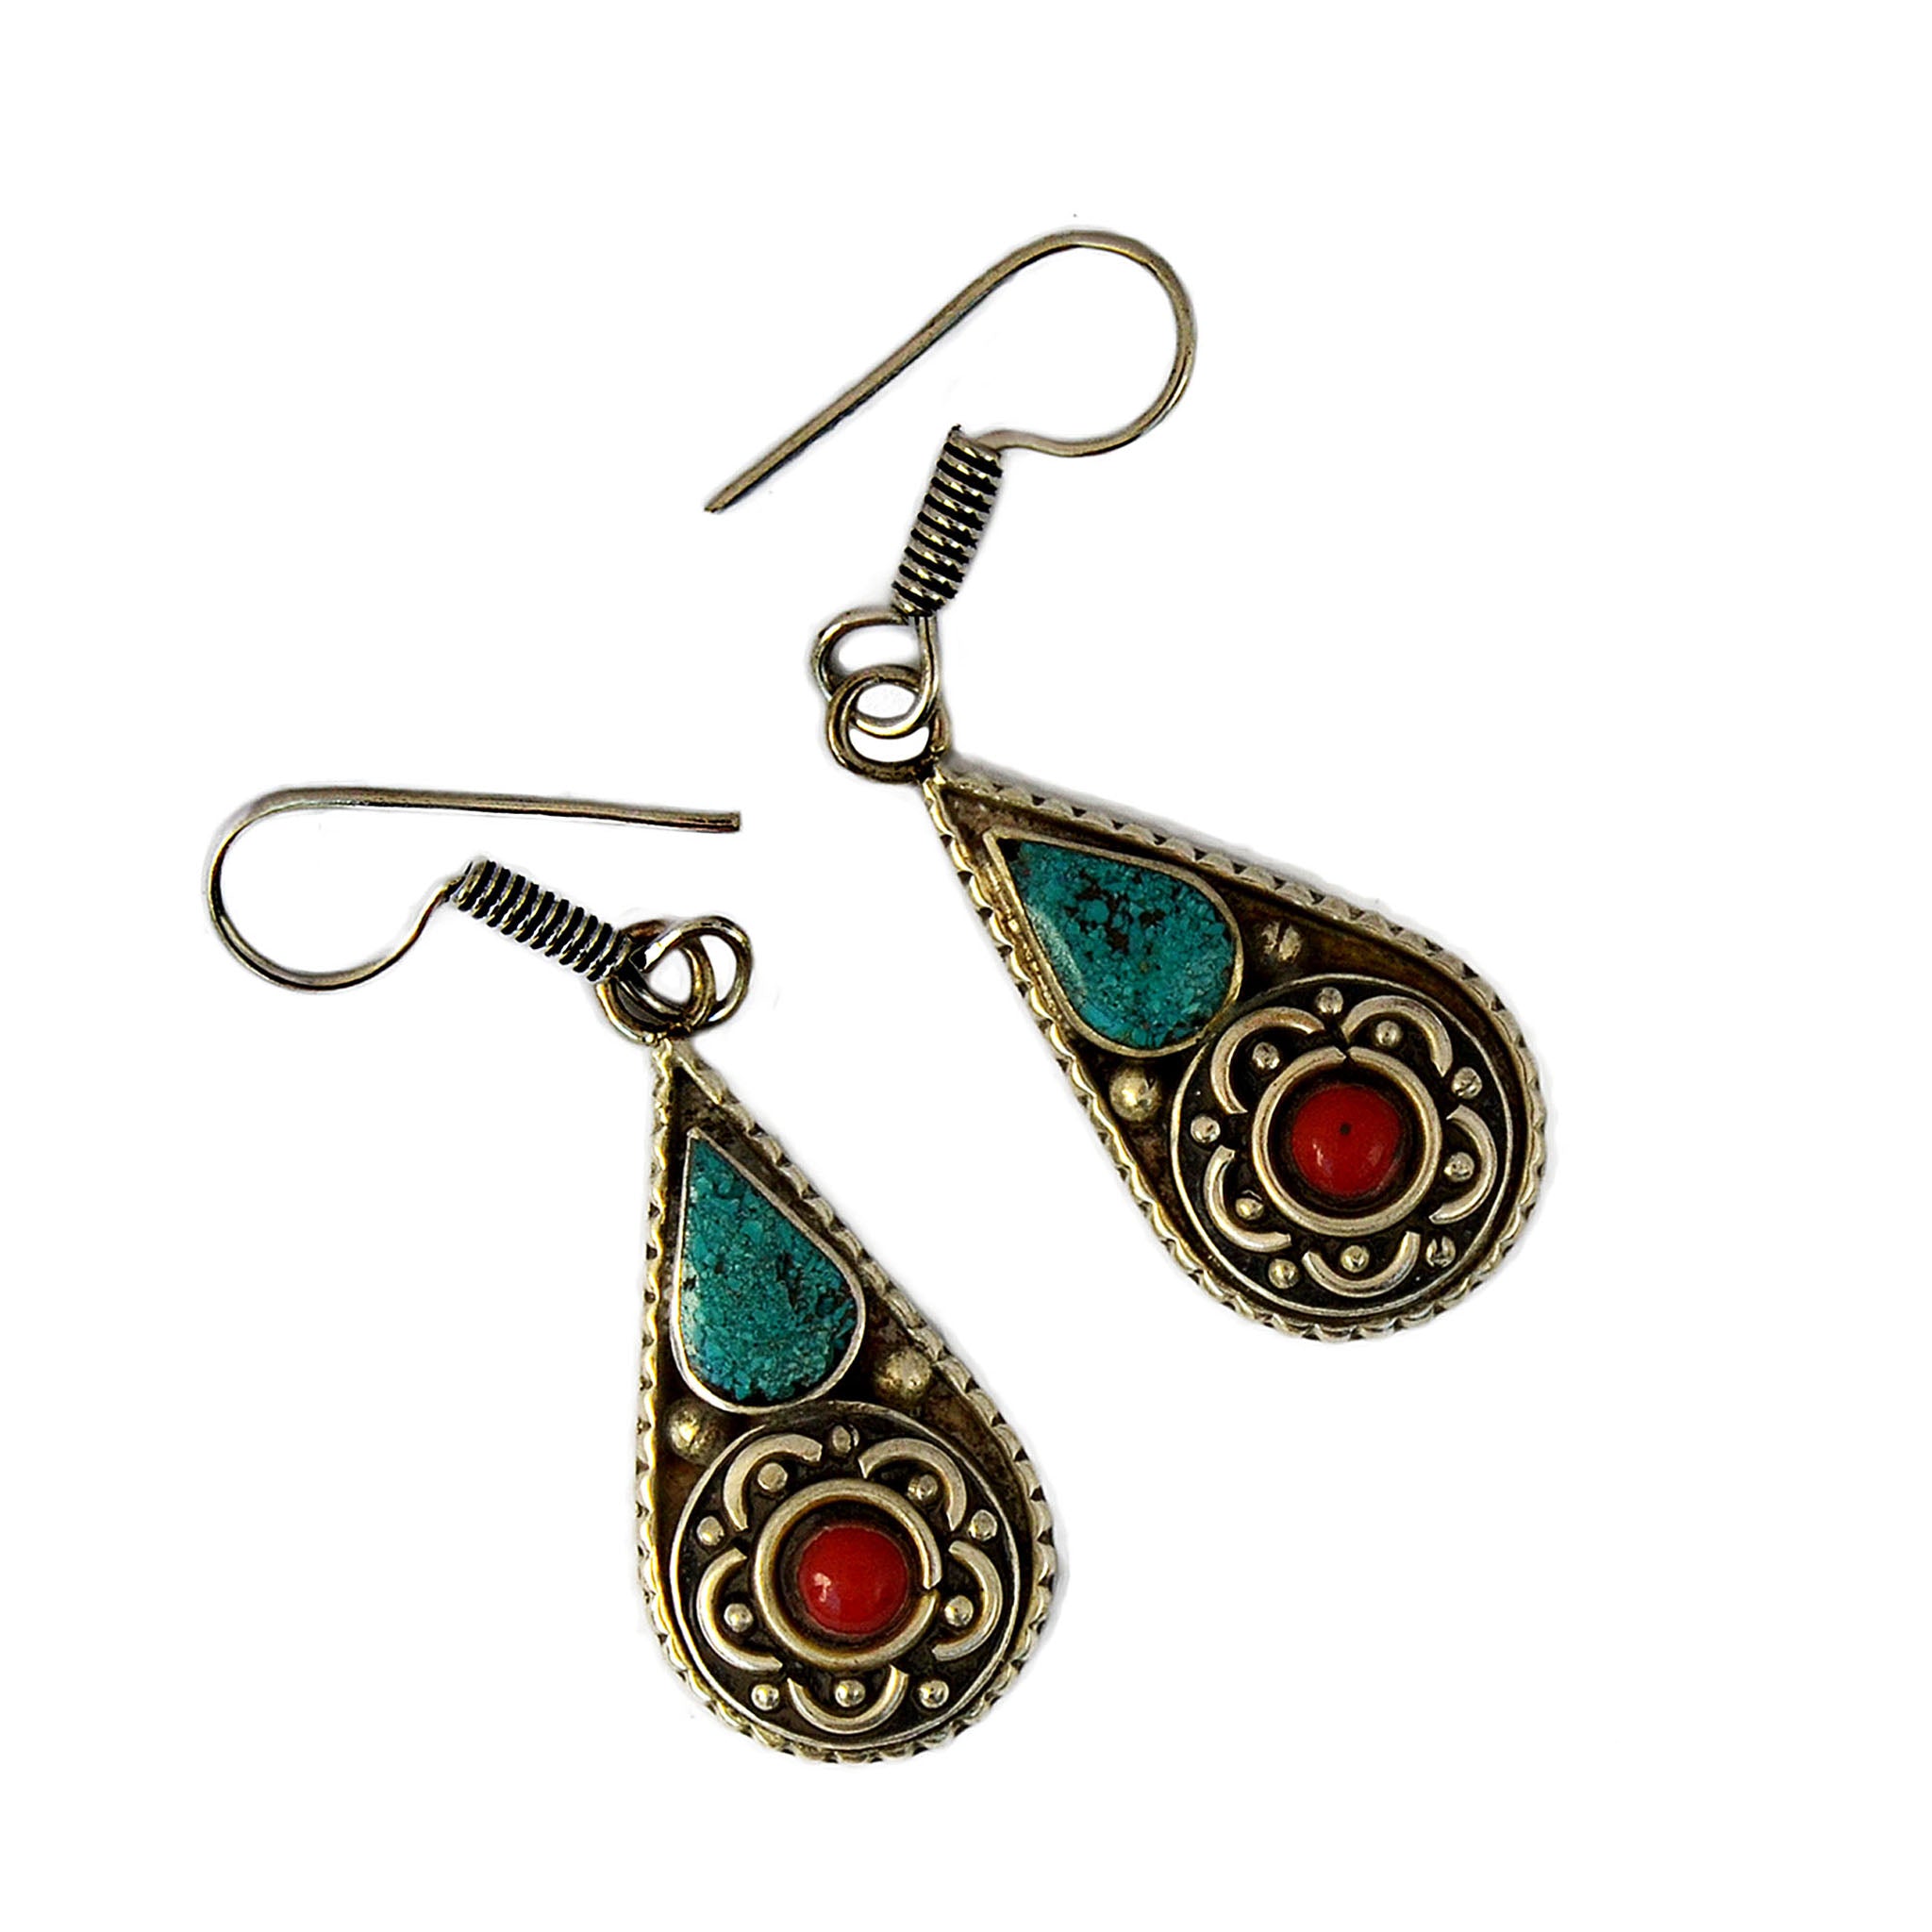 Silver tibetan hanging earrings with inlay turquoise and red coral stones